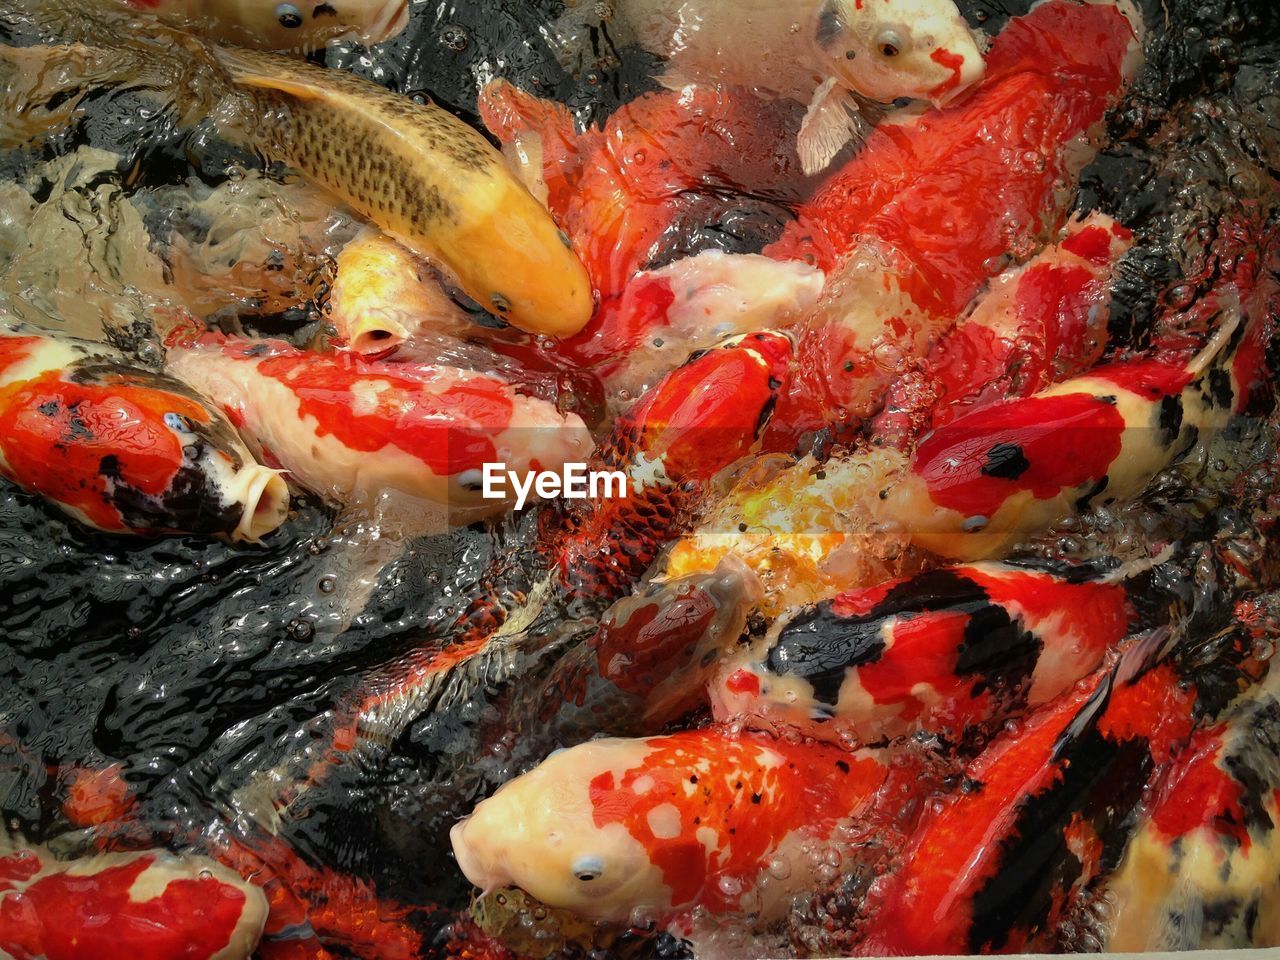 CLOSE-UP HIGH ANGLE VIEW OF KOI CARPS SWIMMING IN WATER